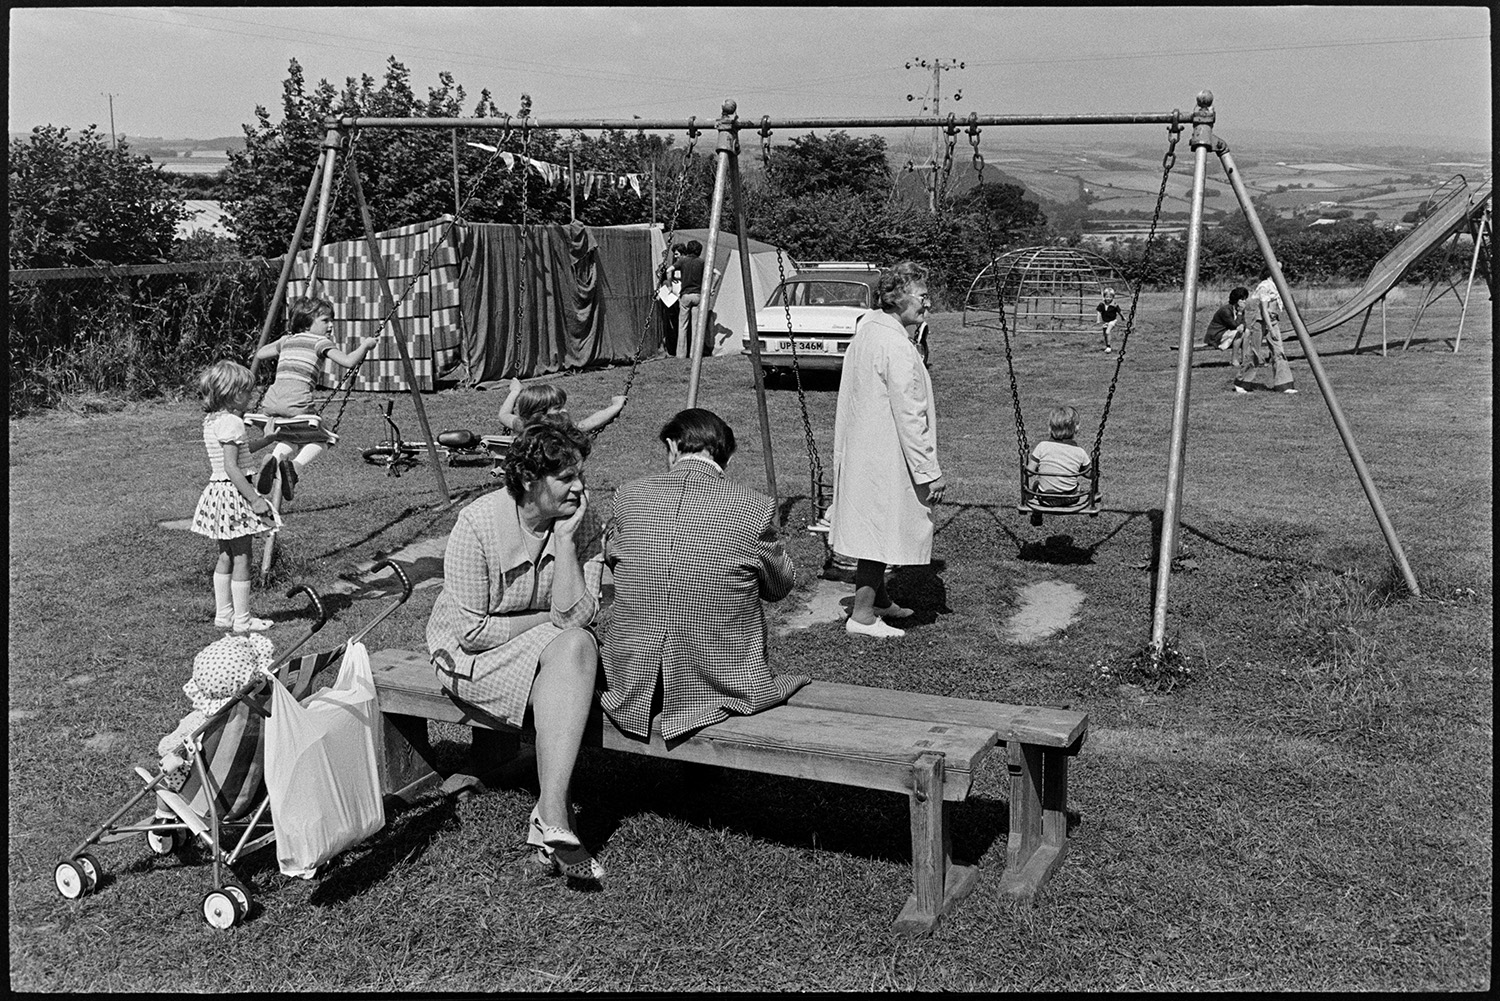 Families, swings, pony rides at village fete. 
[Children playing on a slide, climbing frame and swings in a field at Atherington fete. A man and woman are sat on a bench by a pushchair and another woman is pushing a child on a swing. Tents and a parked car are visible in the background.]